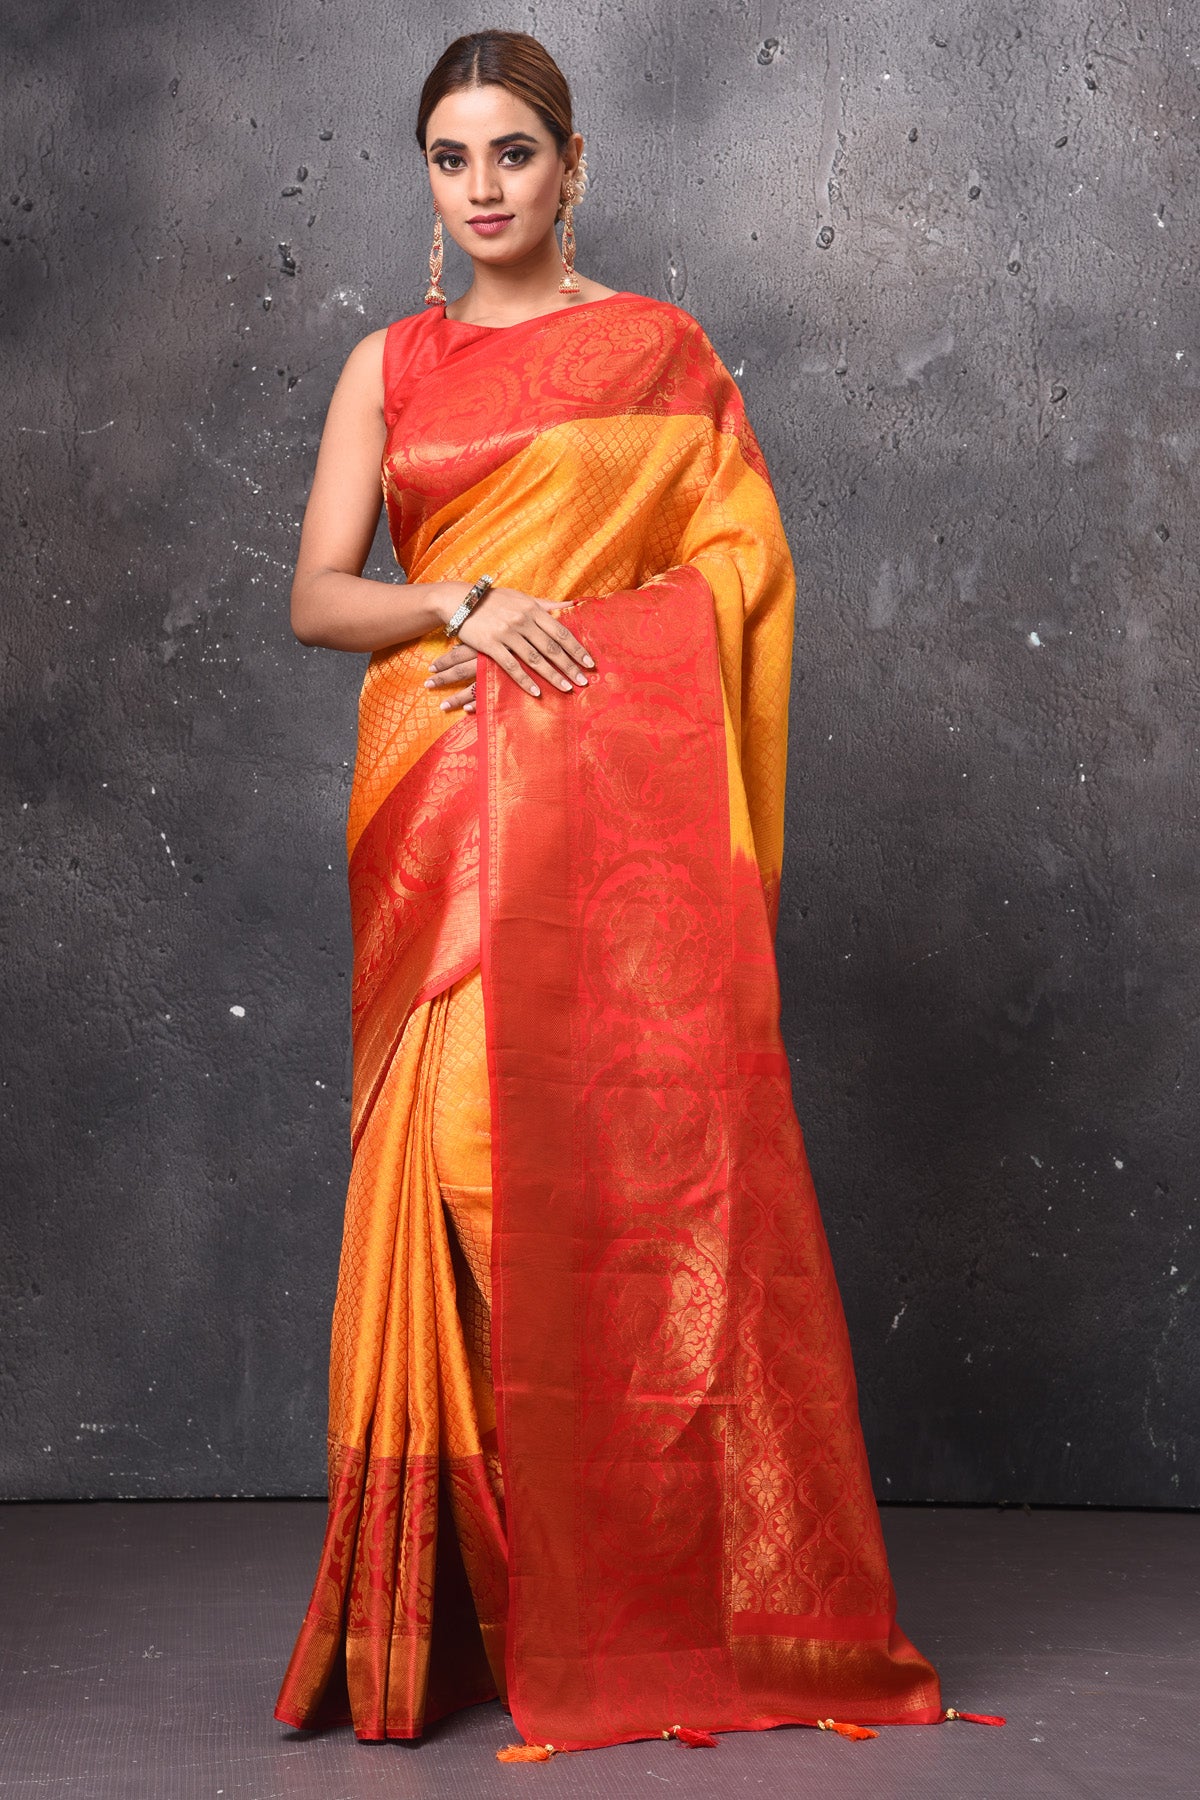 Buy stunning orange Gadwal check sari online in USA with red zari border. Keep your ethnic wardrobe up to date with latest designer sarees, pure silk sarees, handwoven sarees, tussar silk sarees, embroidered sarees, Banarasi saris from Pure Elegance Indian saree store in USA.-full view